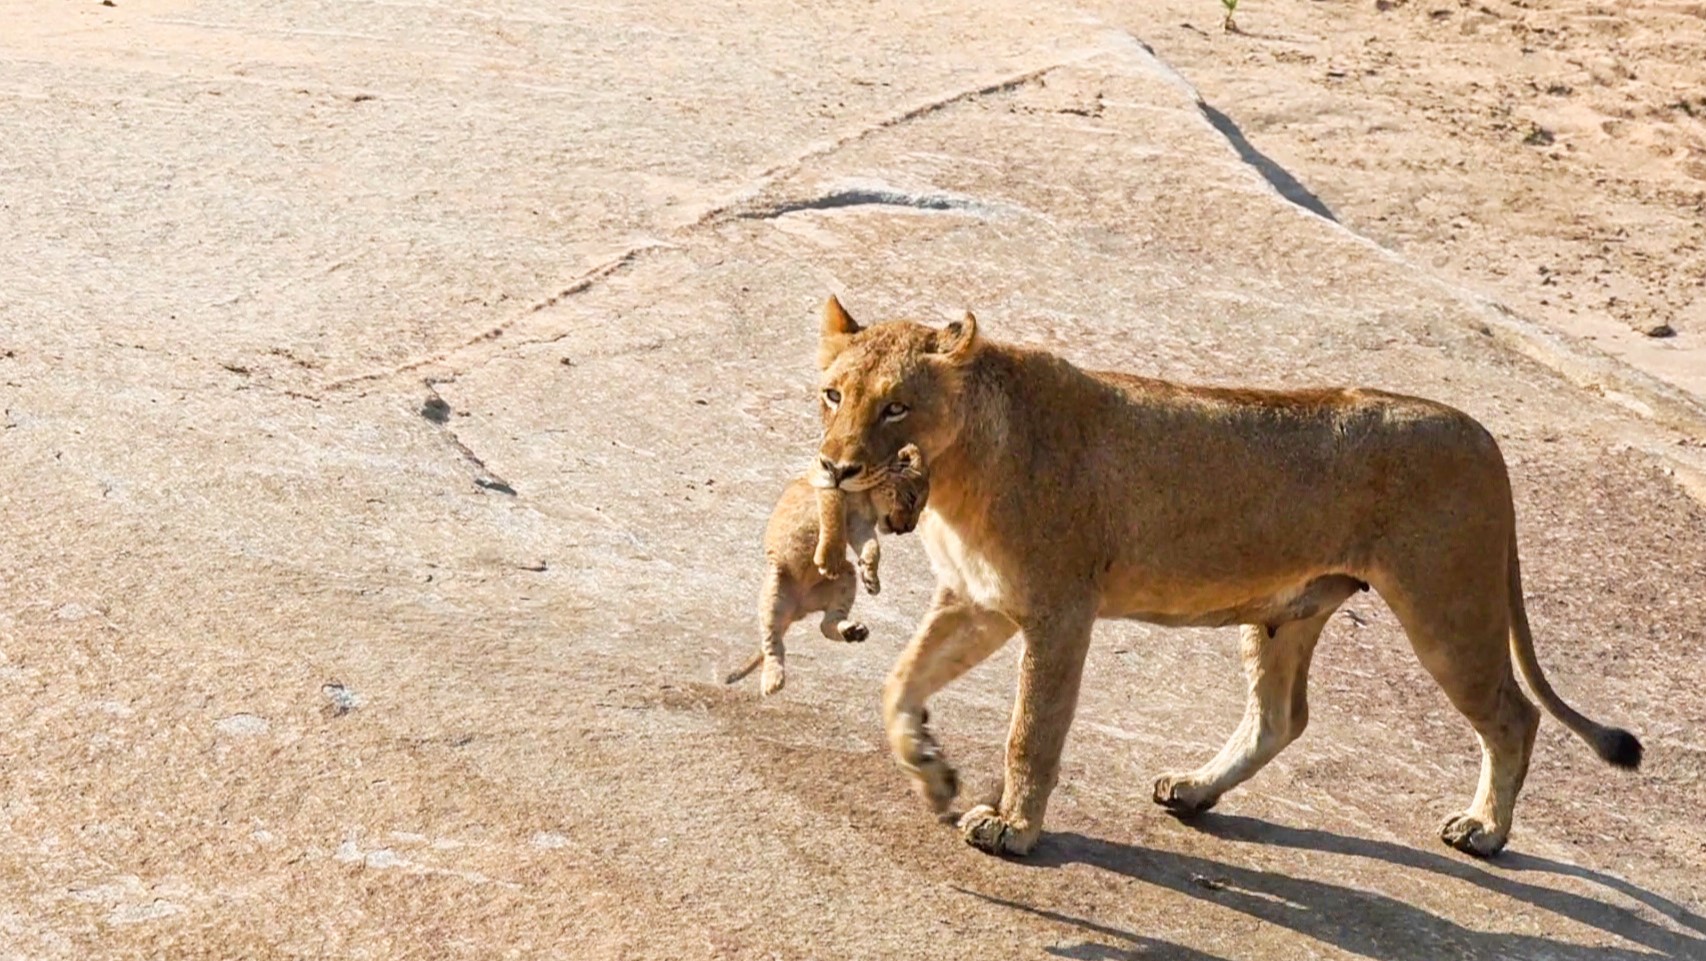 Lioness Carries Her Cub Across River